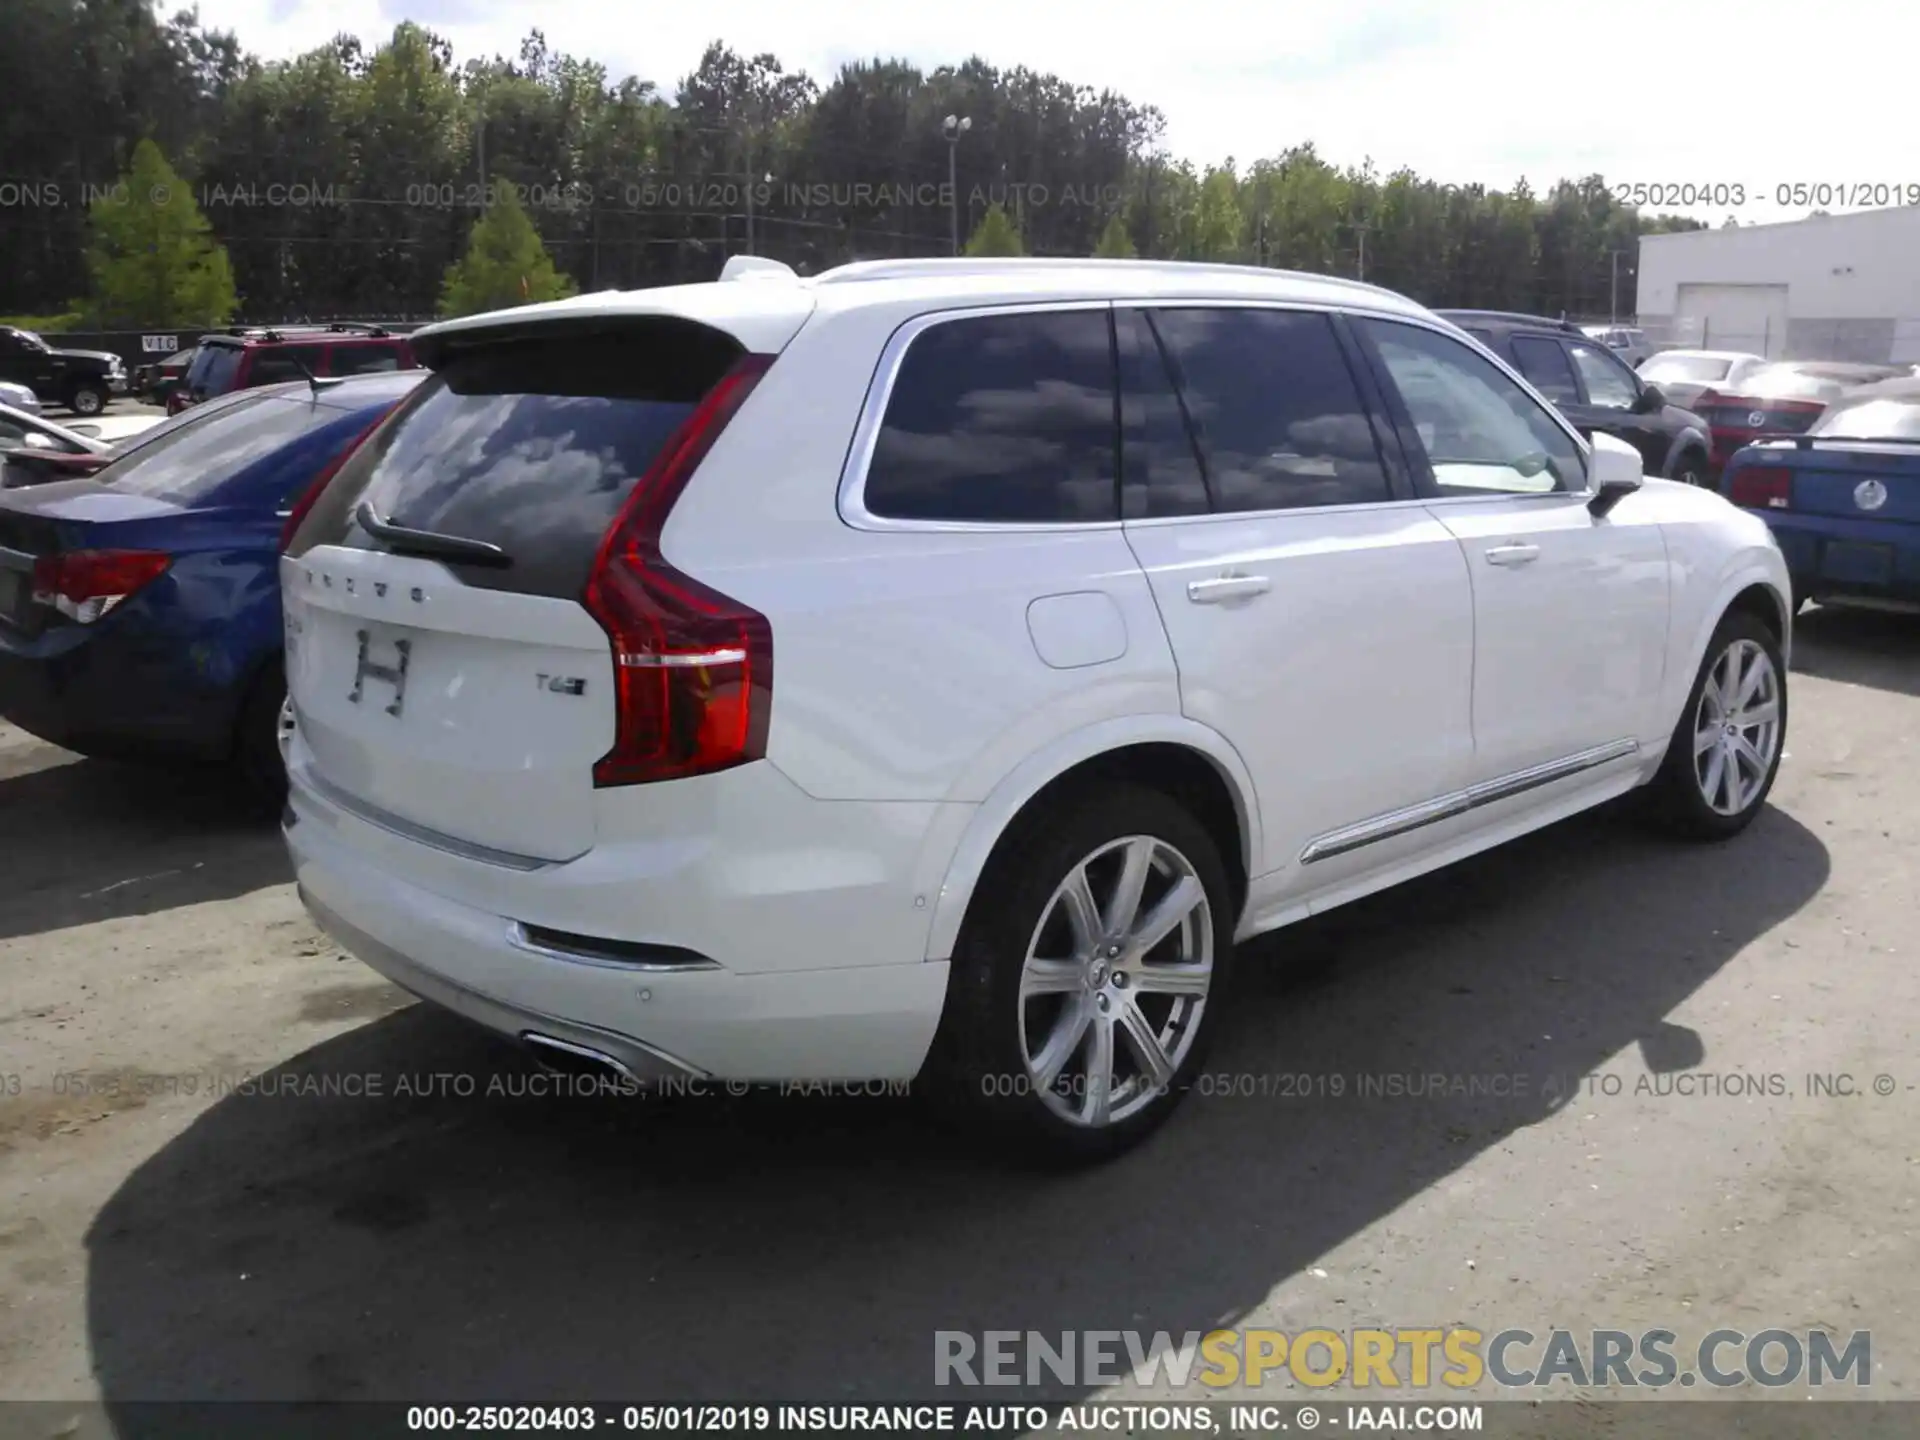 4 Photograph of a damaged car YV4A22PLXK1431420 VOLVO XC90 2019